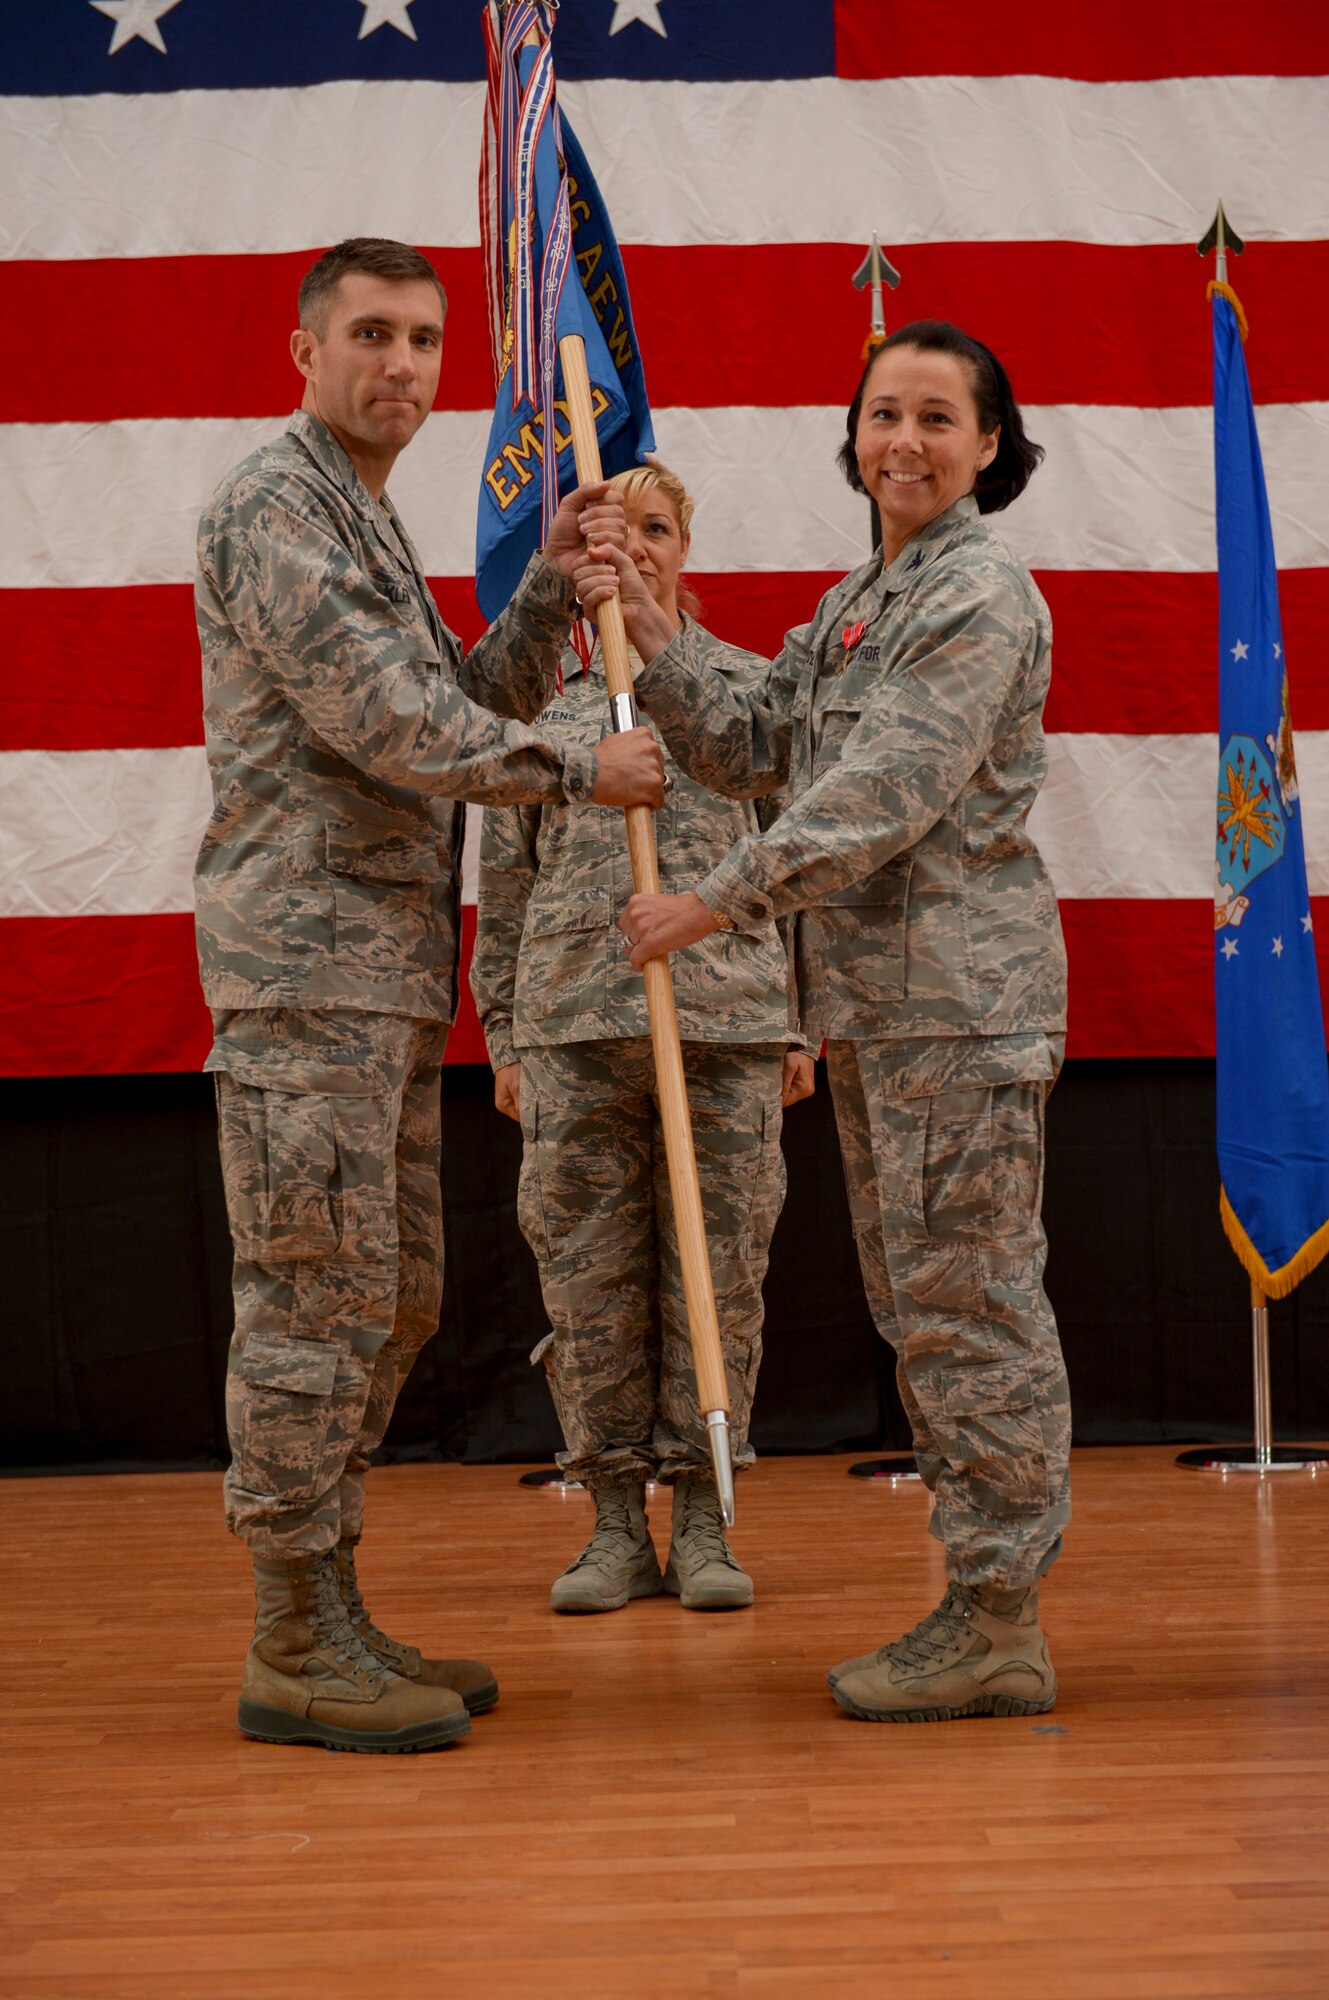 Col. Jeannine Ryder, 386th Expeditionary Medical Group commander, passes the 386th EMDG guidon to Col. John Klein, 386th Air Expeditionary Wing commander during a change of command ceremony held June 8, 2014 at The Rock. Ryder relinquished command of the 386th EMDG to Col. Susan Davis who deployed from the 59th Medical Wing, Joint Base San Antonio-Lackland, Texas. (U.S. Air Force photo by Staff Sgt. Jeremy Bowcock)